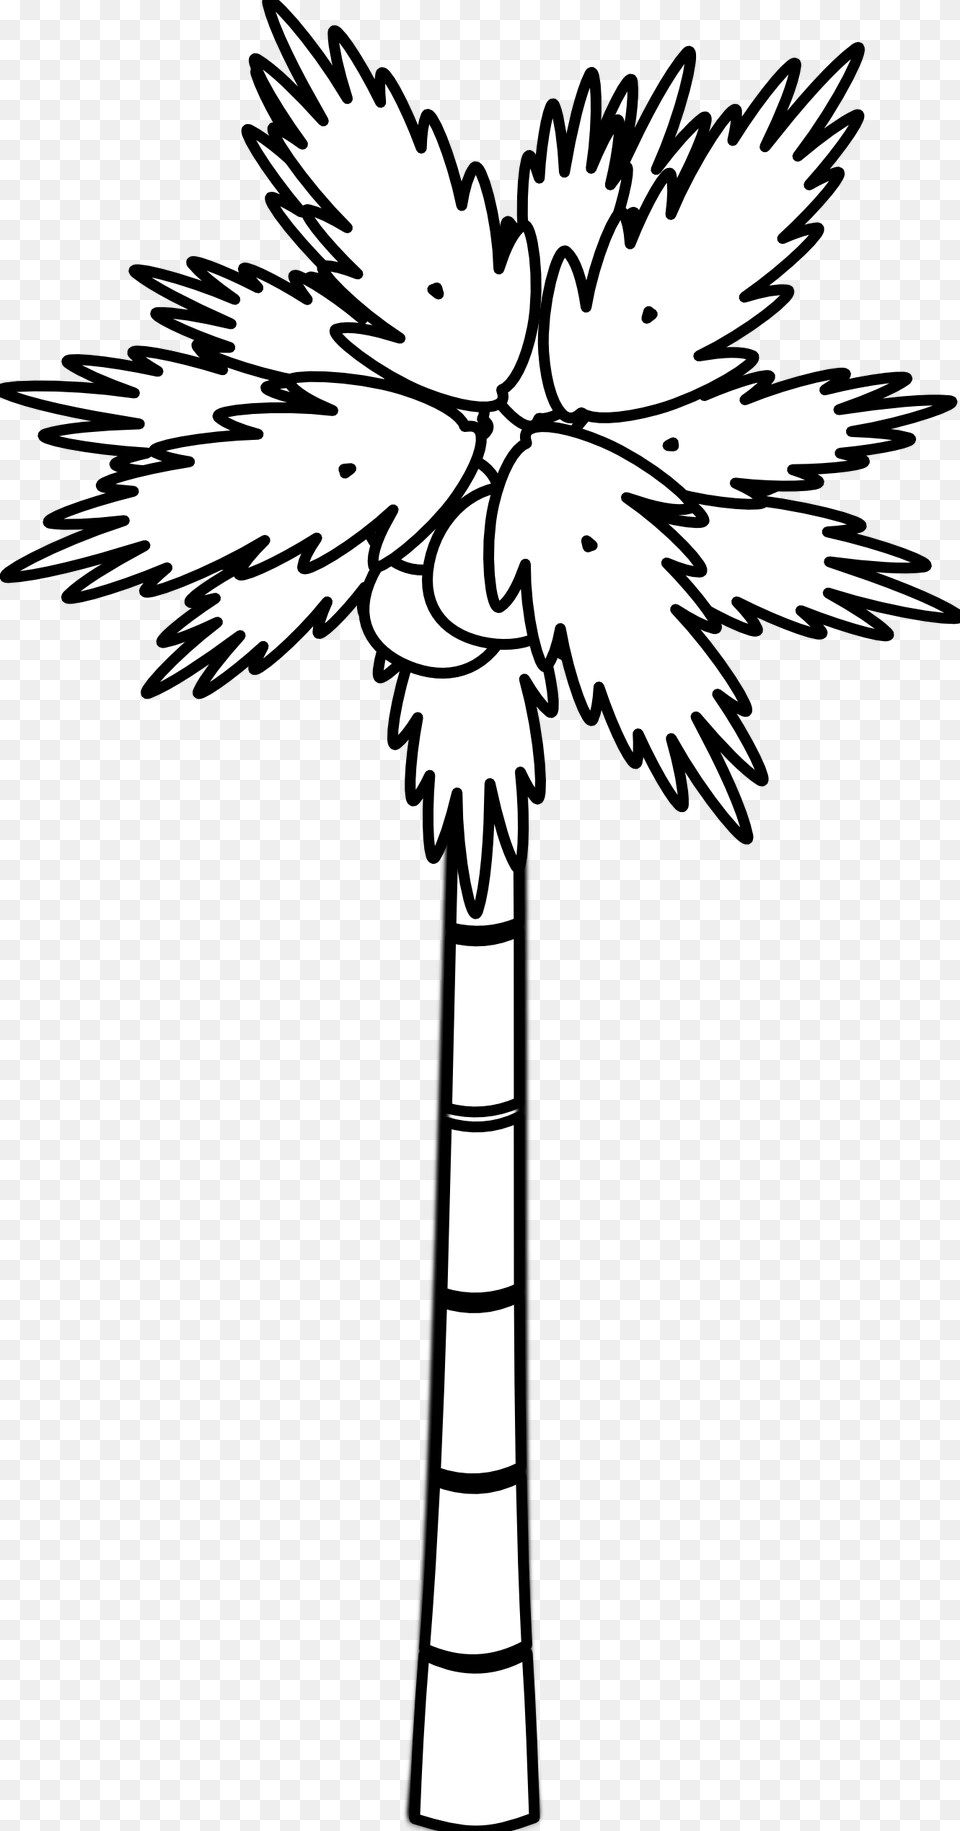 Jungle Trees Clipart 23 555 X 1059 Webcomicmsnet Coconut Tree Clipart Black And White, Palm Tree, Plant, Stencil, Person Free Transparent Png